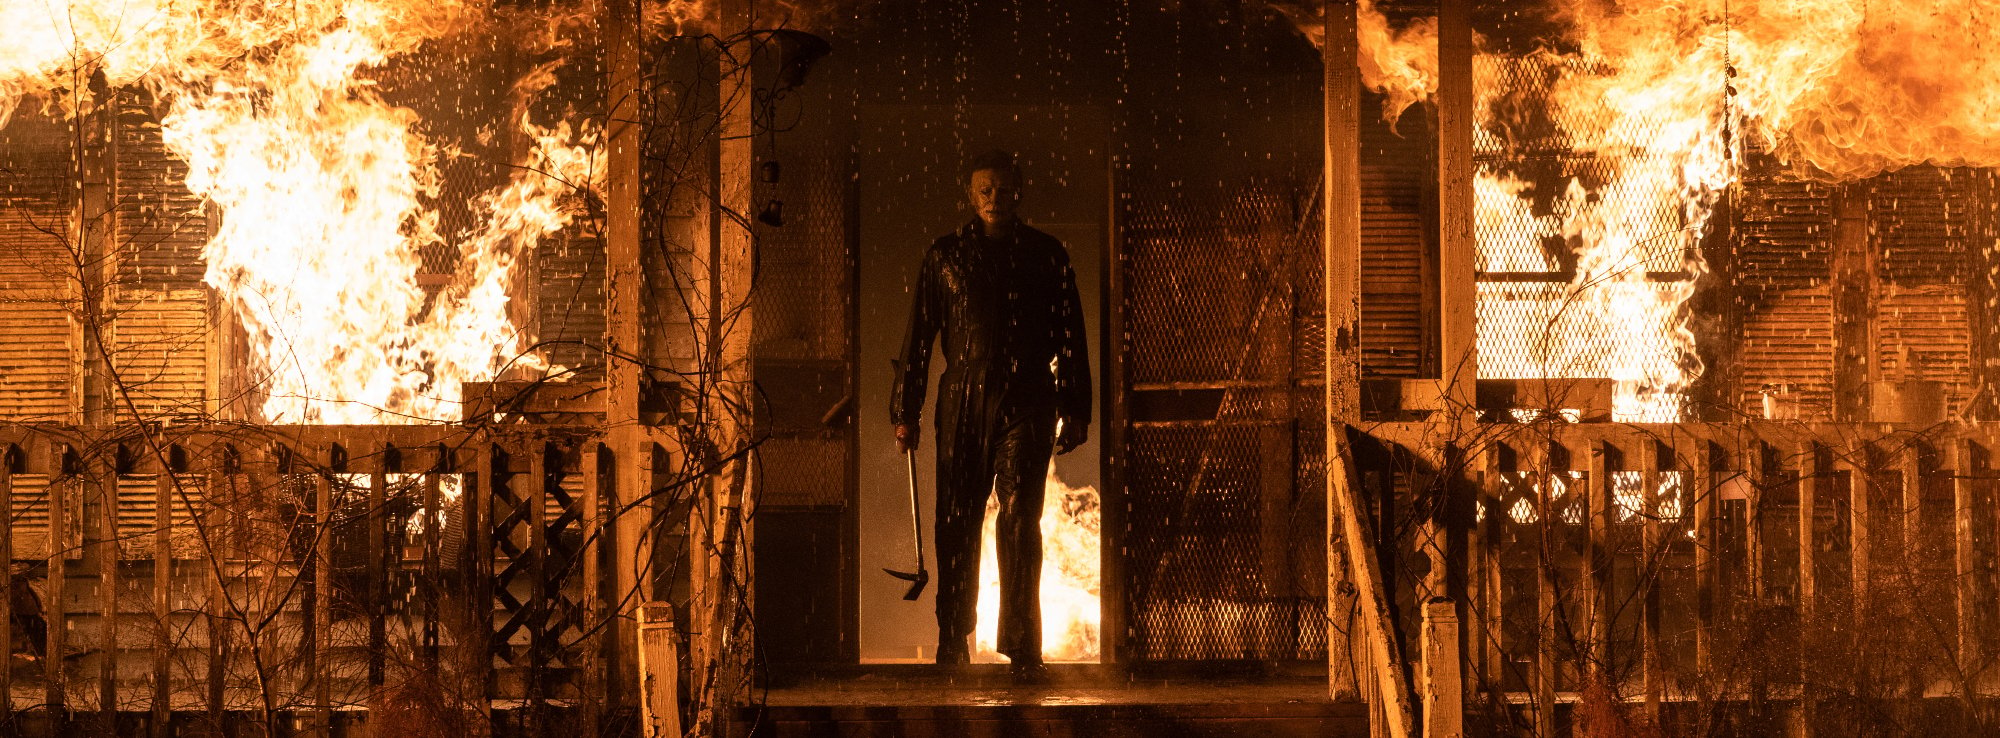 'Halloween Kills' killer Michael Myers escaping from a house on fire